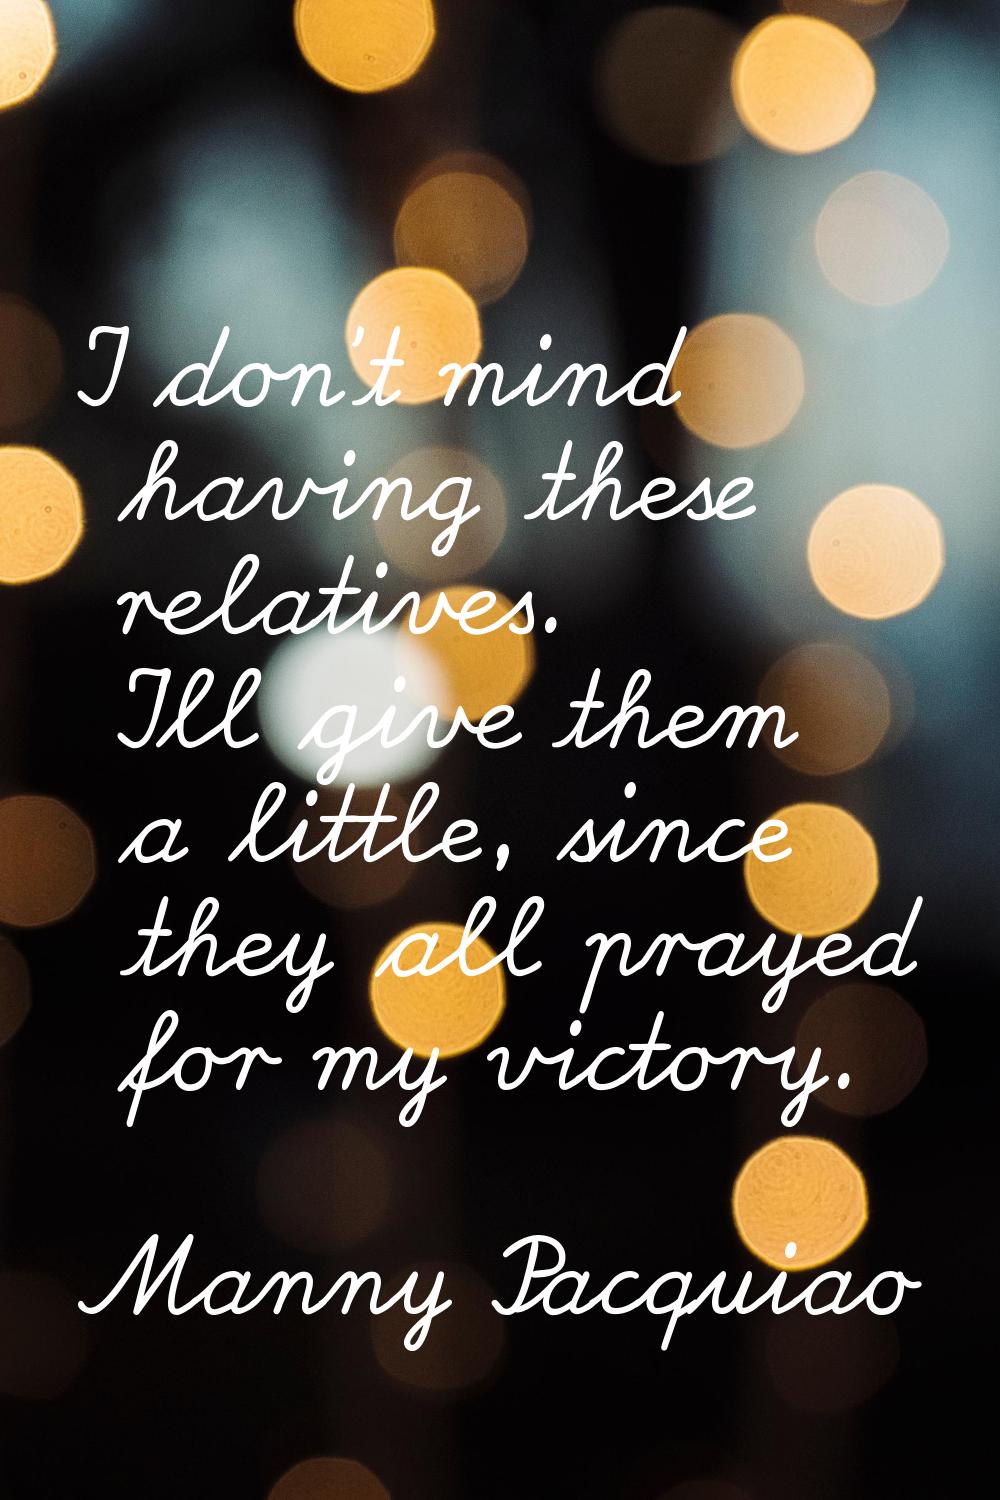 I don't mind having these relatives. I'll give them a little, since they all prayed for my victory.